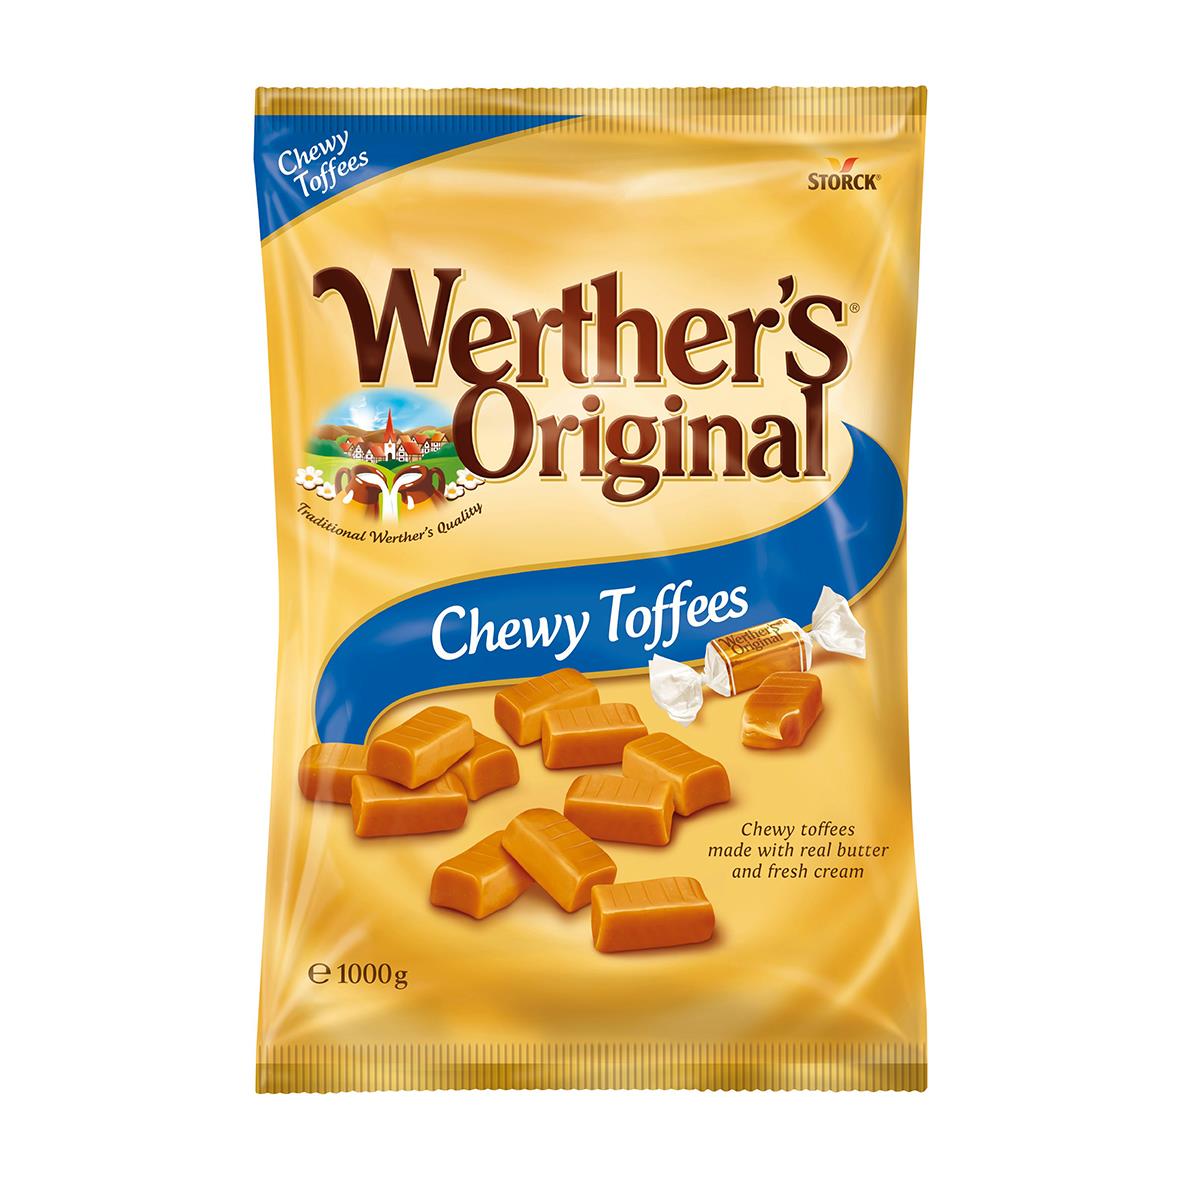 Godis Werther's Chewy Toffees 1000g 60010669